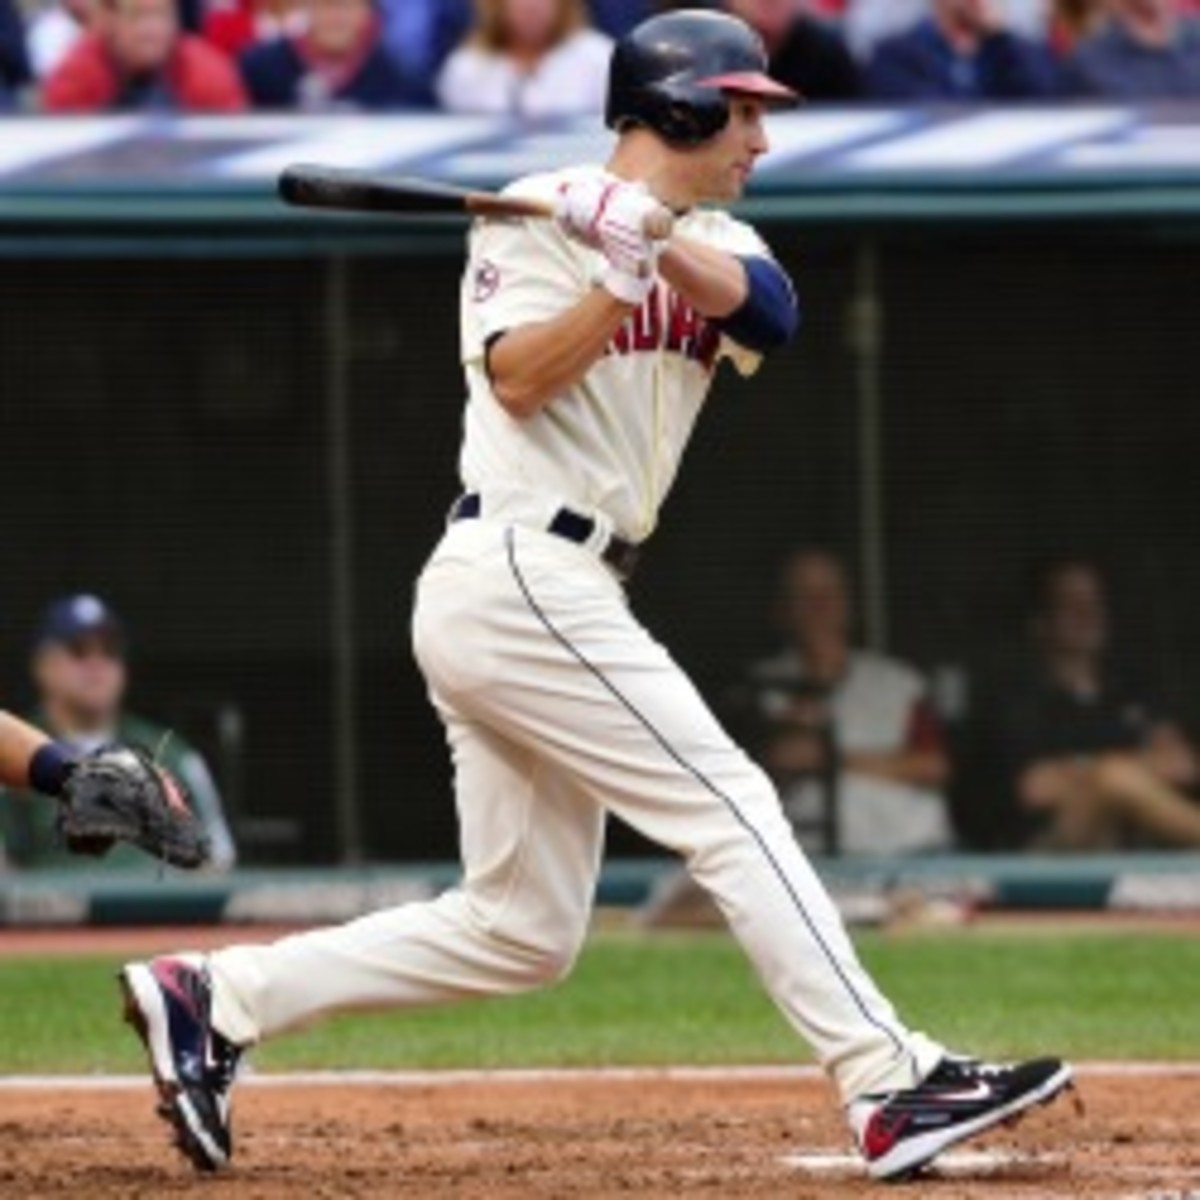 Free-agent outfielder Grady Sizemore had surgery on his knee and won't be ready to start the 2013 season. (Jason Miller/Getty Images)